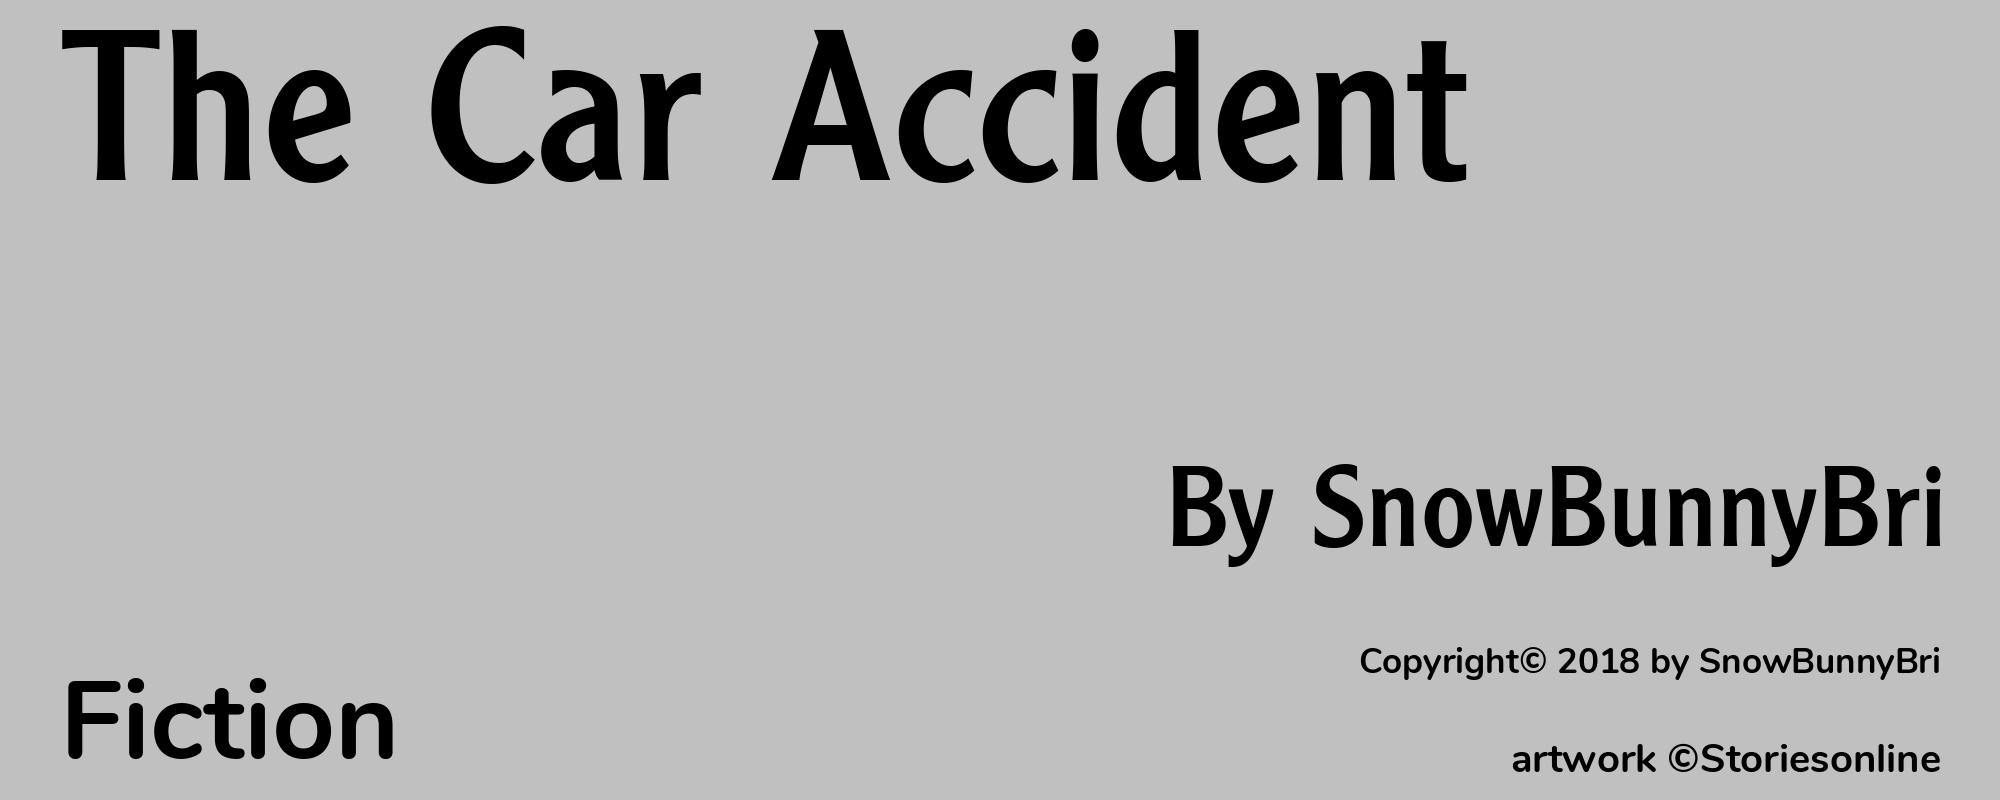 The Car Accident - Cover